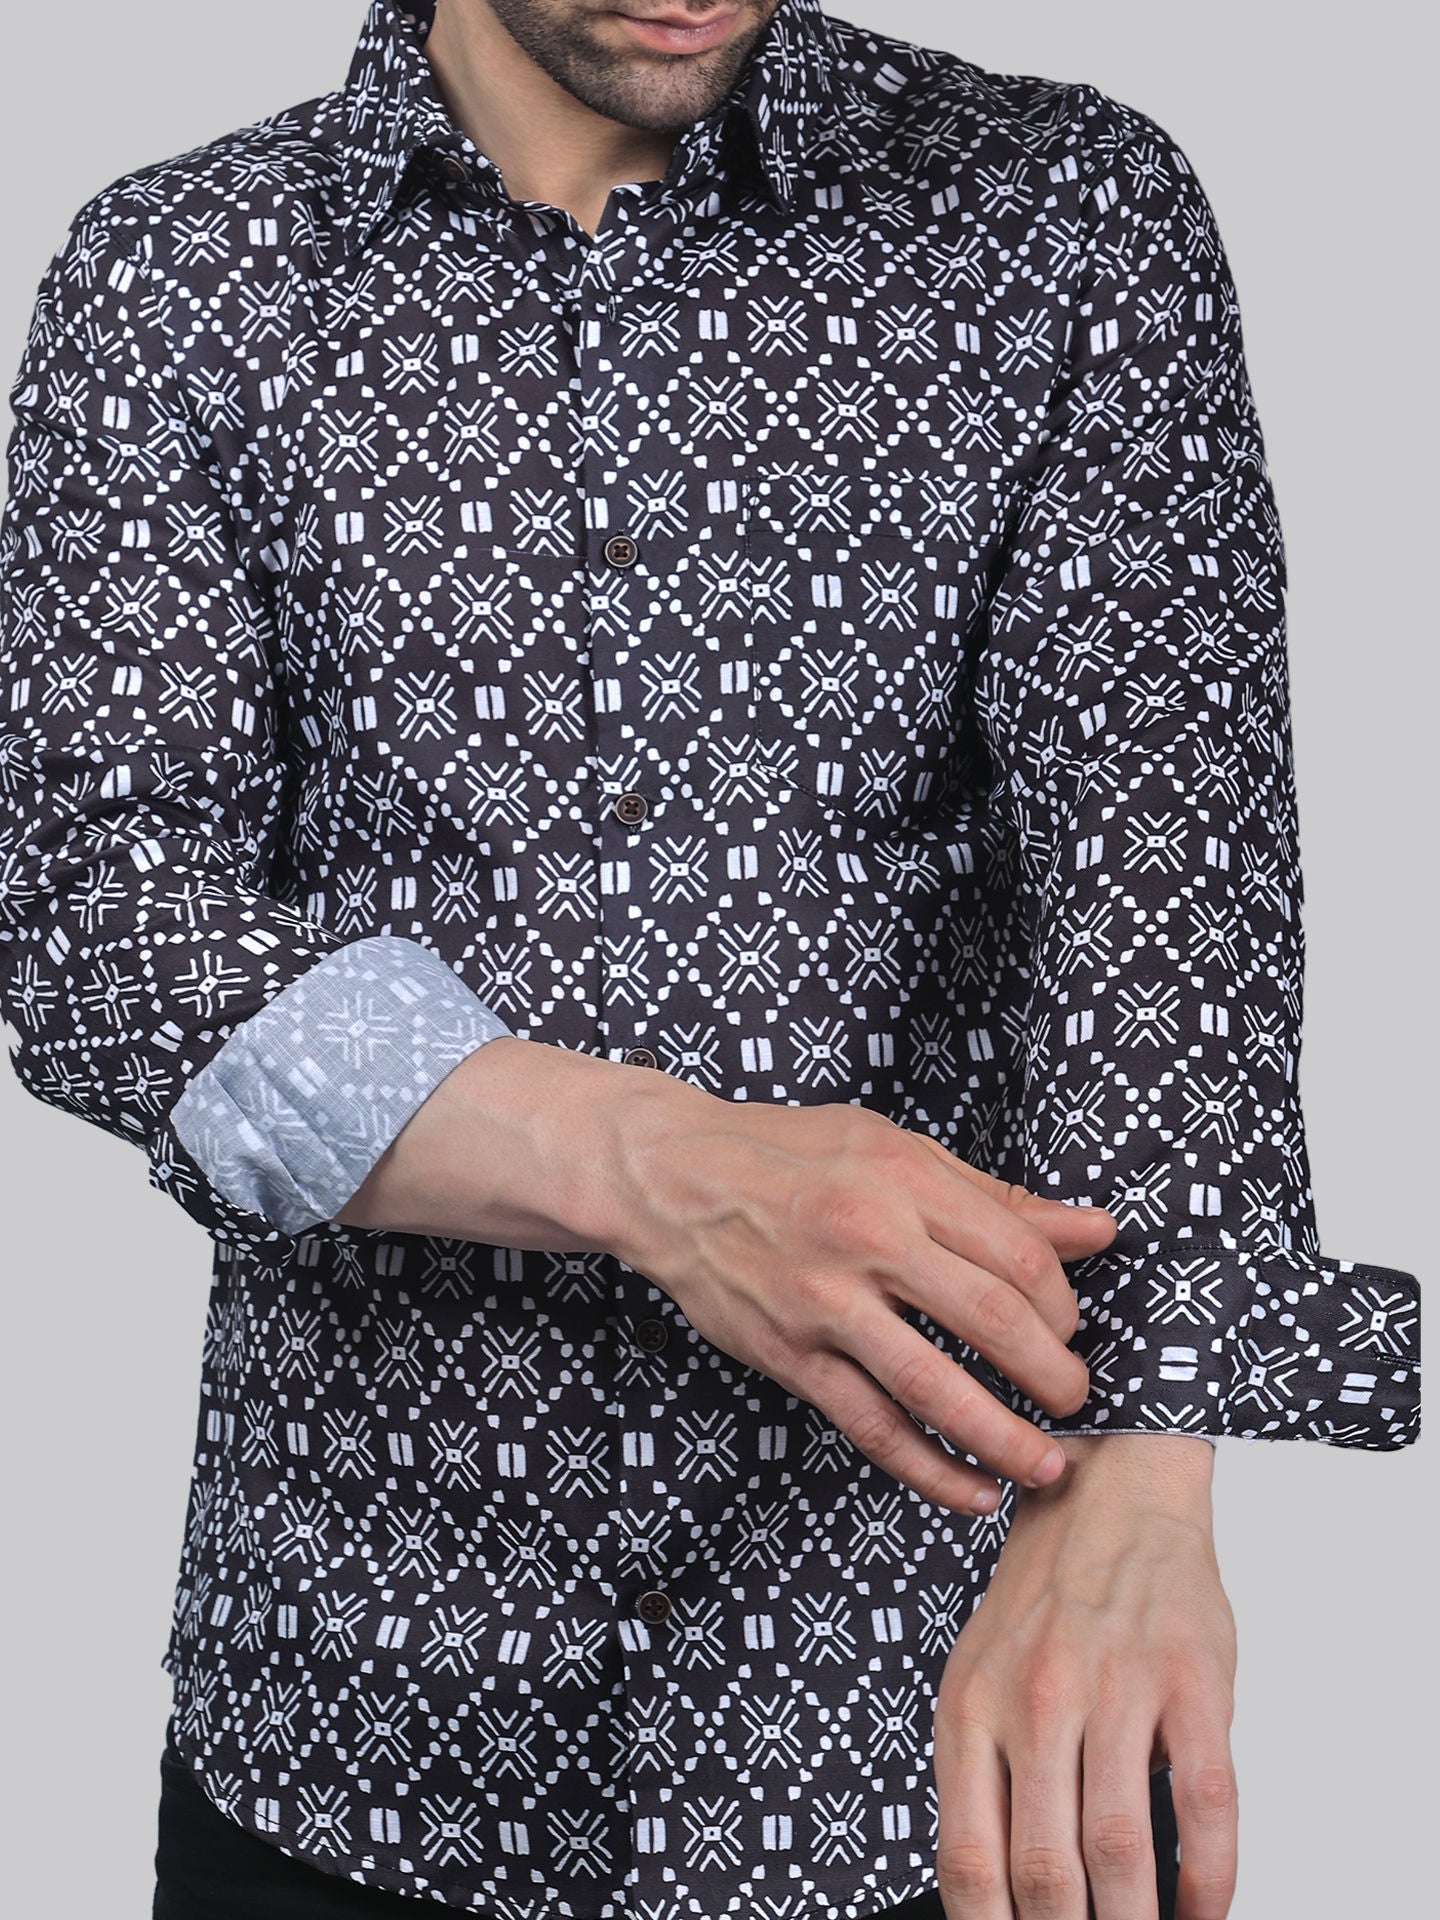 TryBuy Fancy Fabulous Full Sleeve Casual Linen Printed Shirt for Men - TryBuy® USA🇺🇸